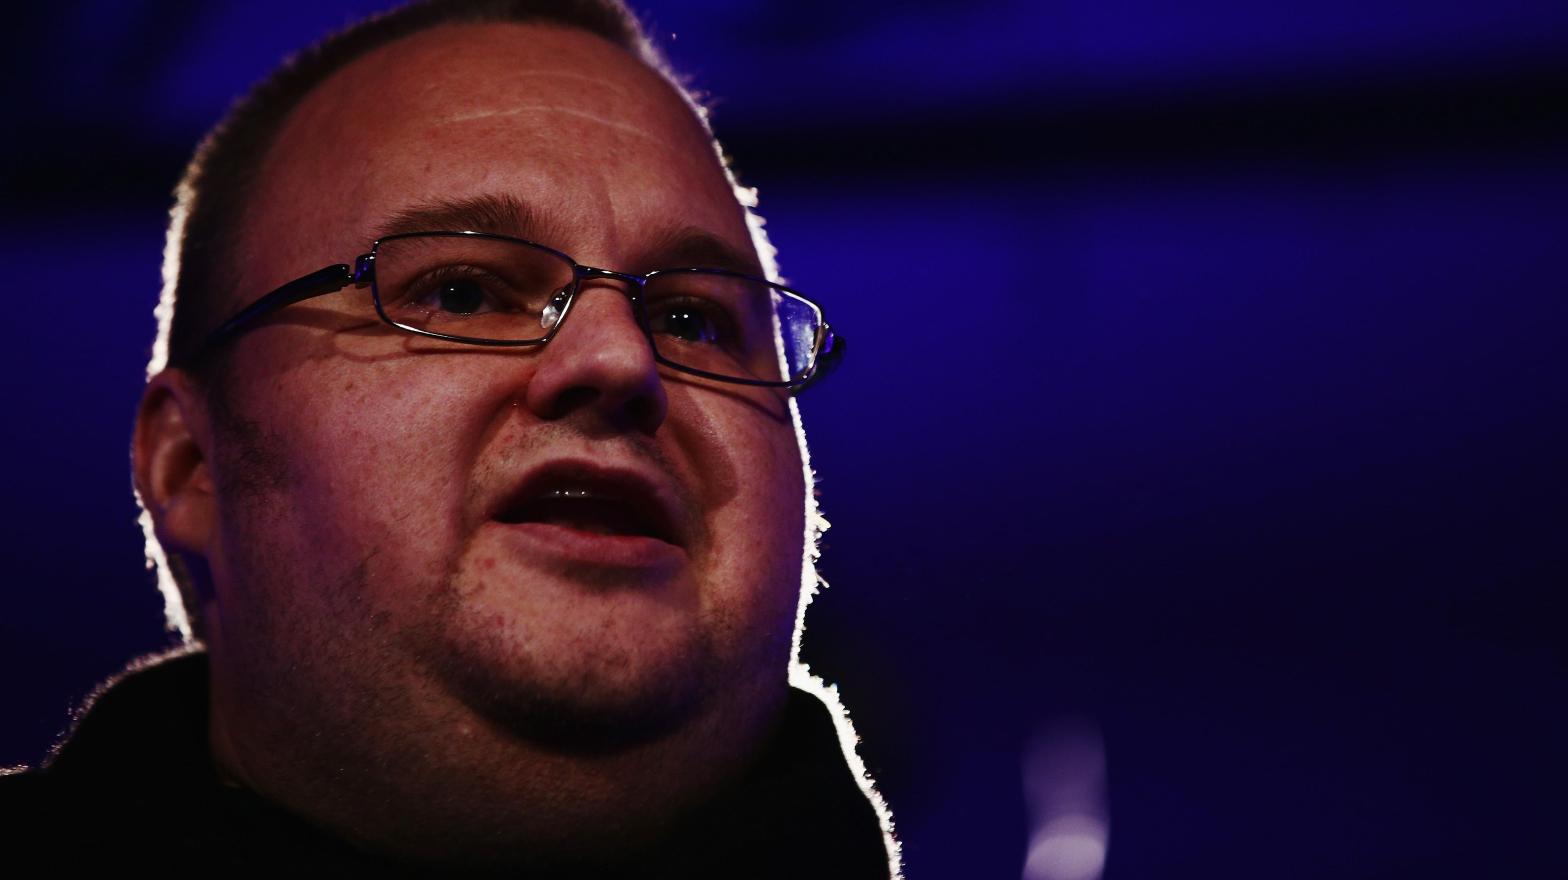 Megaupload founder Kim Dotcom (Photo: Hannah Peters, Getty Images)